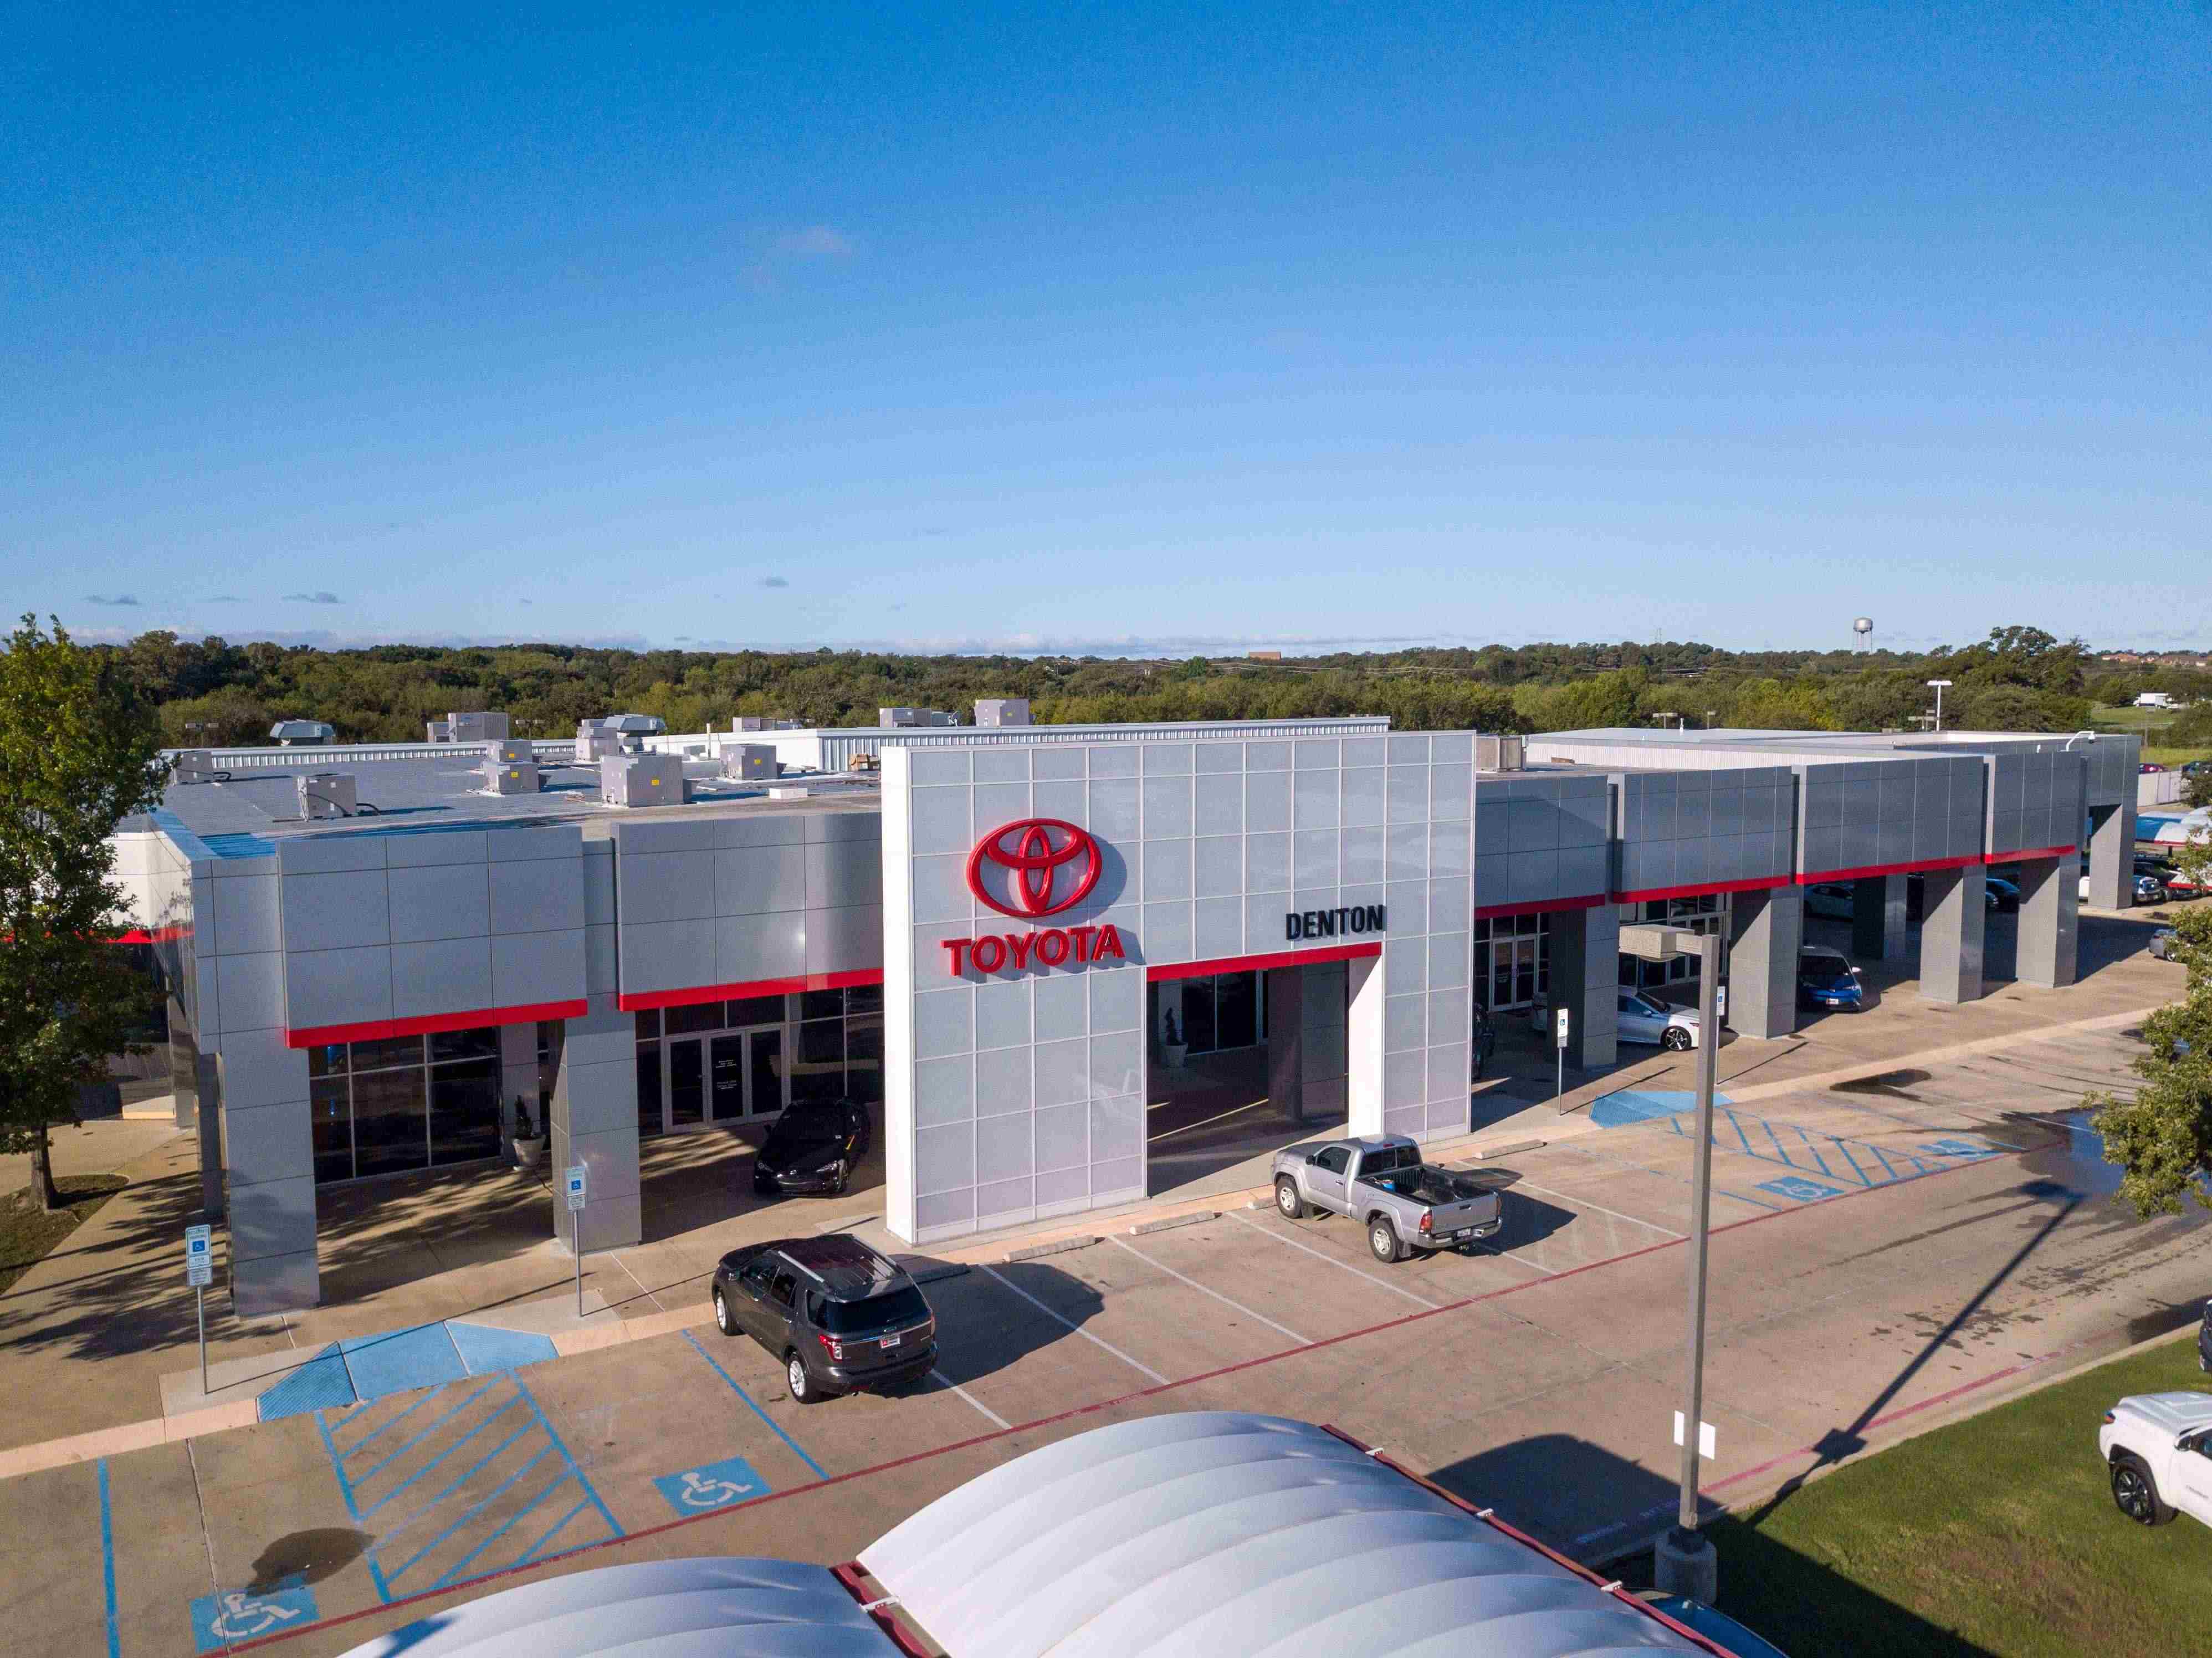 At Toyota of Denton, we offer a selection of brand-new 2022 Toyota 4Runner and 2021 Toyota RAV4 models. Visit our local Toyota dealer in Plano, Texas, to find your perfect car today! With an impressive variety of features and a knowledgeable staff, we are your top choice for Toyota vehicles in Denton, TX.